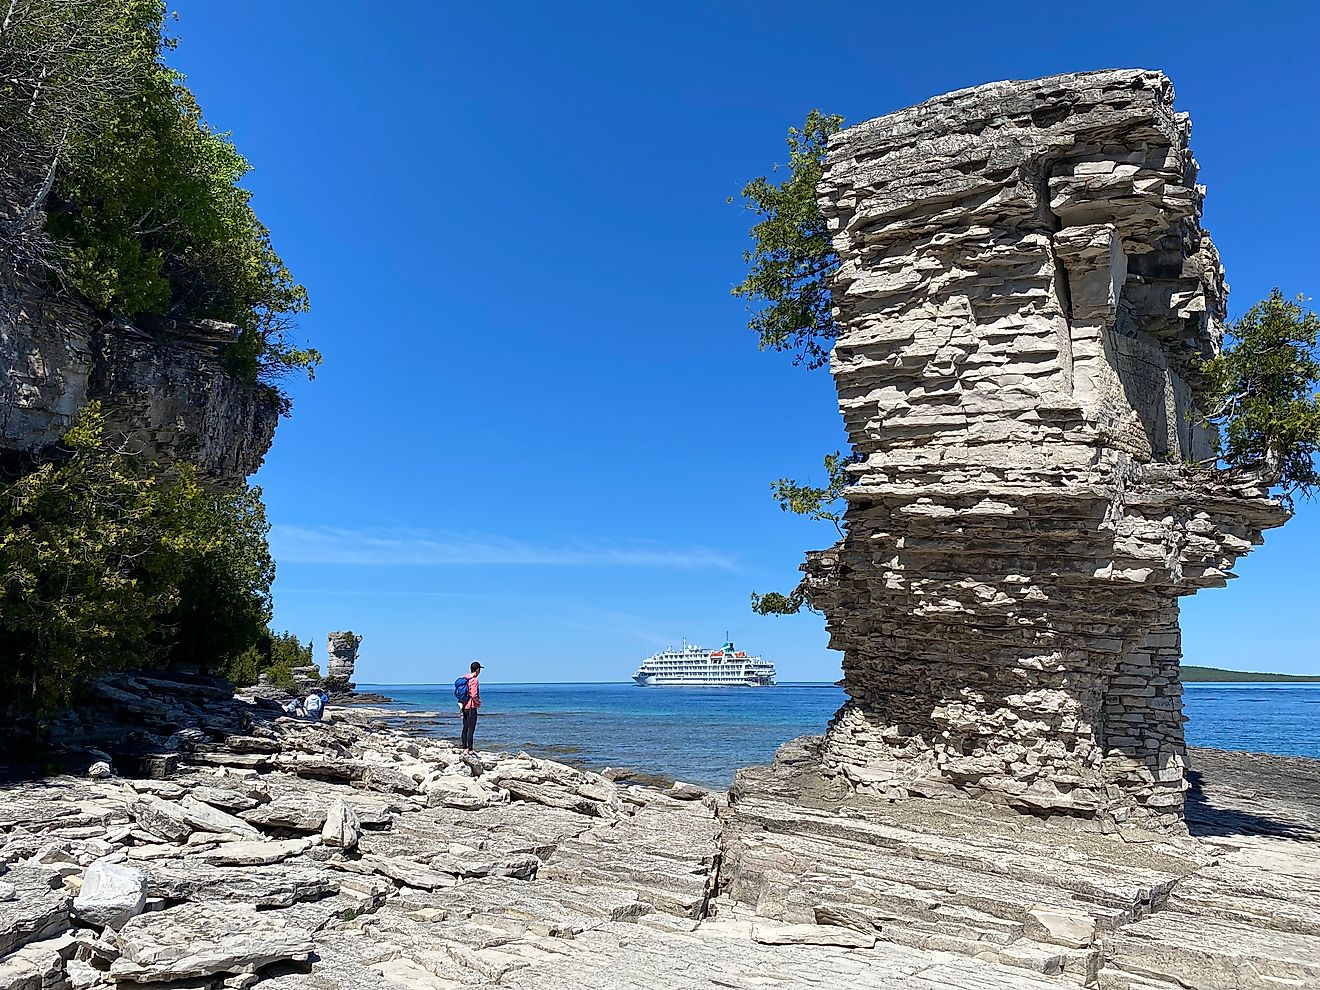 The namesake formations of Flowerpot Island in Fathom Five National Marine Park. A woman in a pink jacket stands by the shore, gazing at a passing cruise ship. Photo: Andrew Douglas